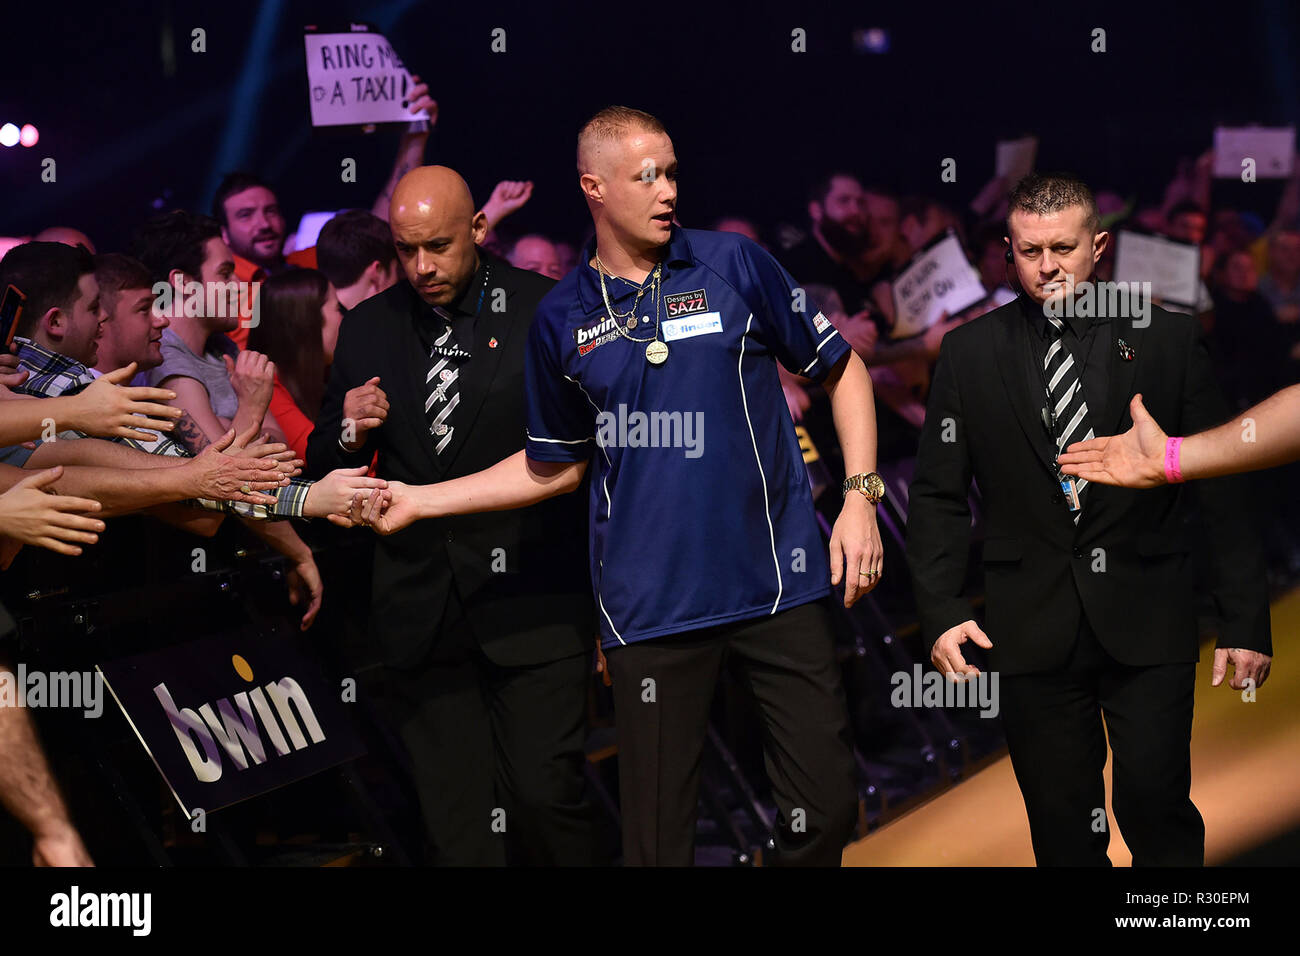 Wolverhampton, United Kingdom. 15th November 2018. Wesley Harms makes his  way to the oche during the BWIN Grand Slam of Darts Group stage at  Aldersley Leisure Village, Wolverhampton (© eg13multimedia | MI